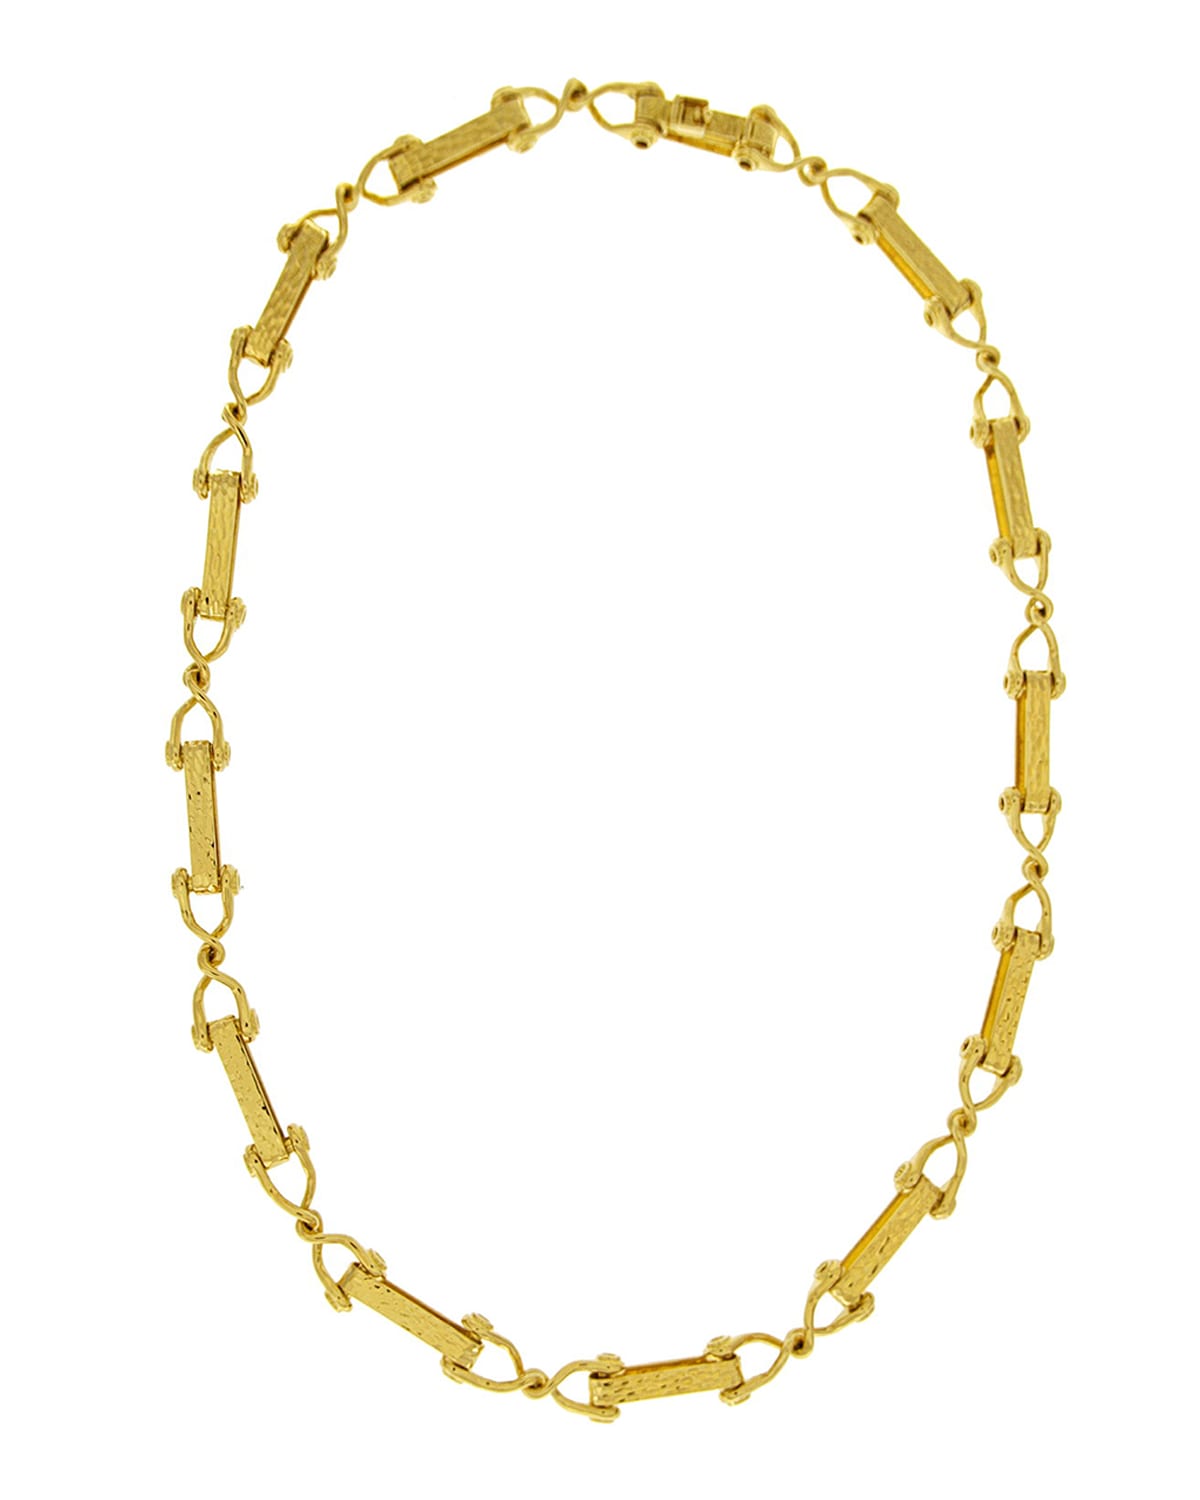 18k Yellow Gold Cleat Necklace, 21"L